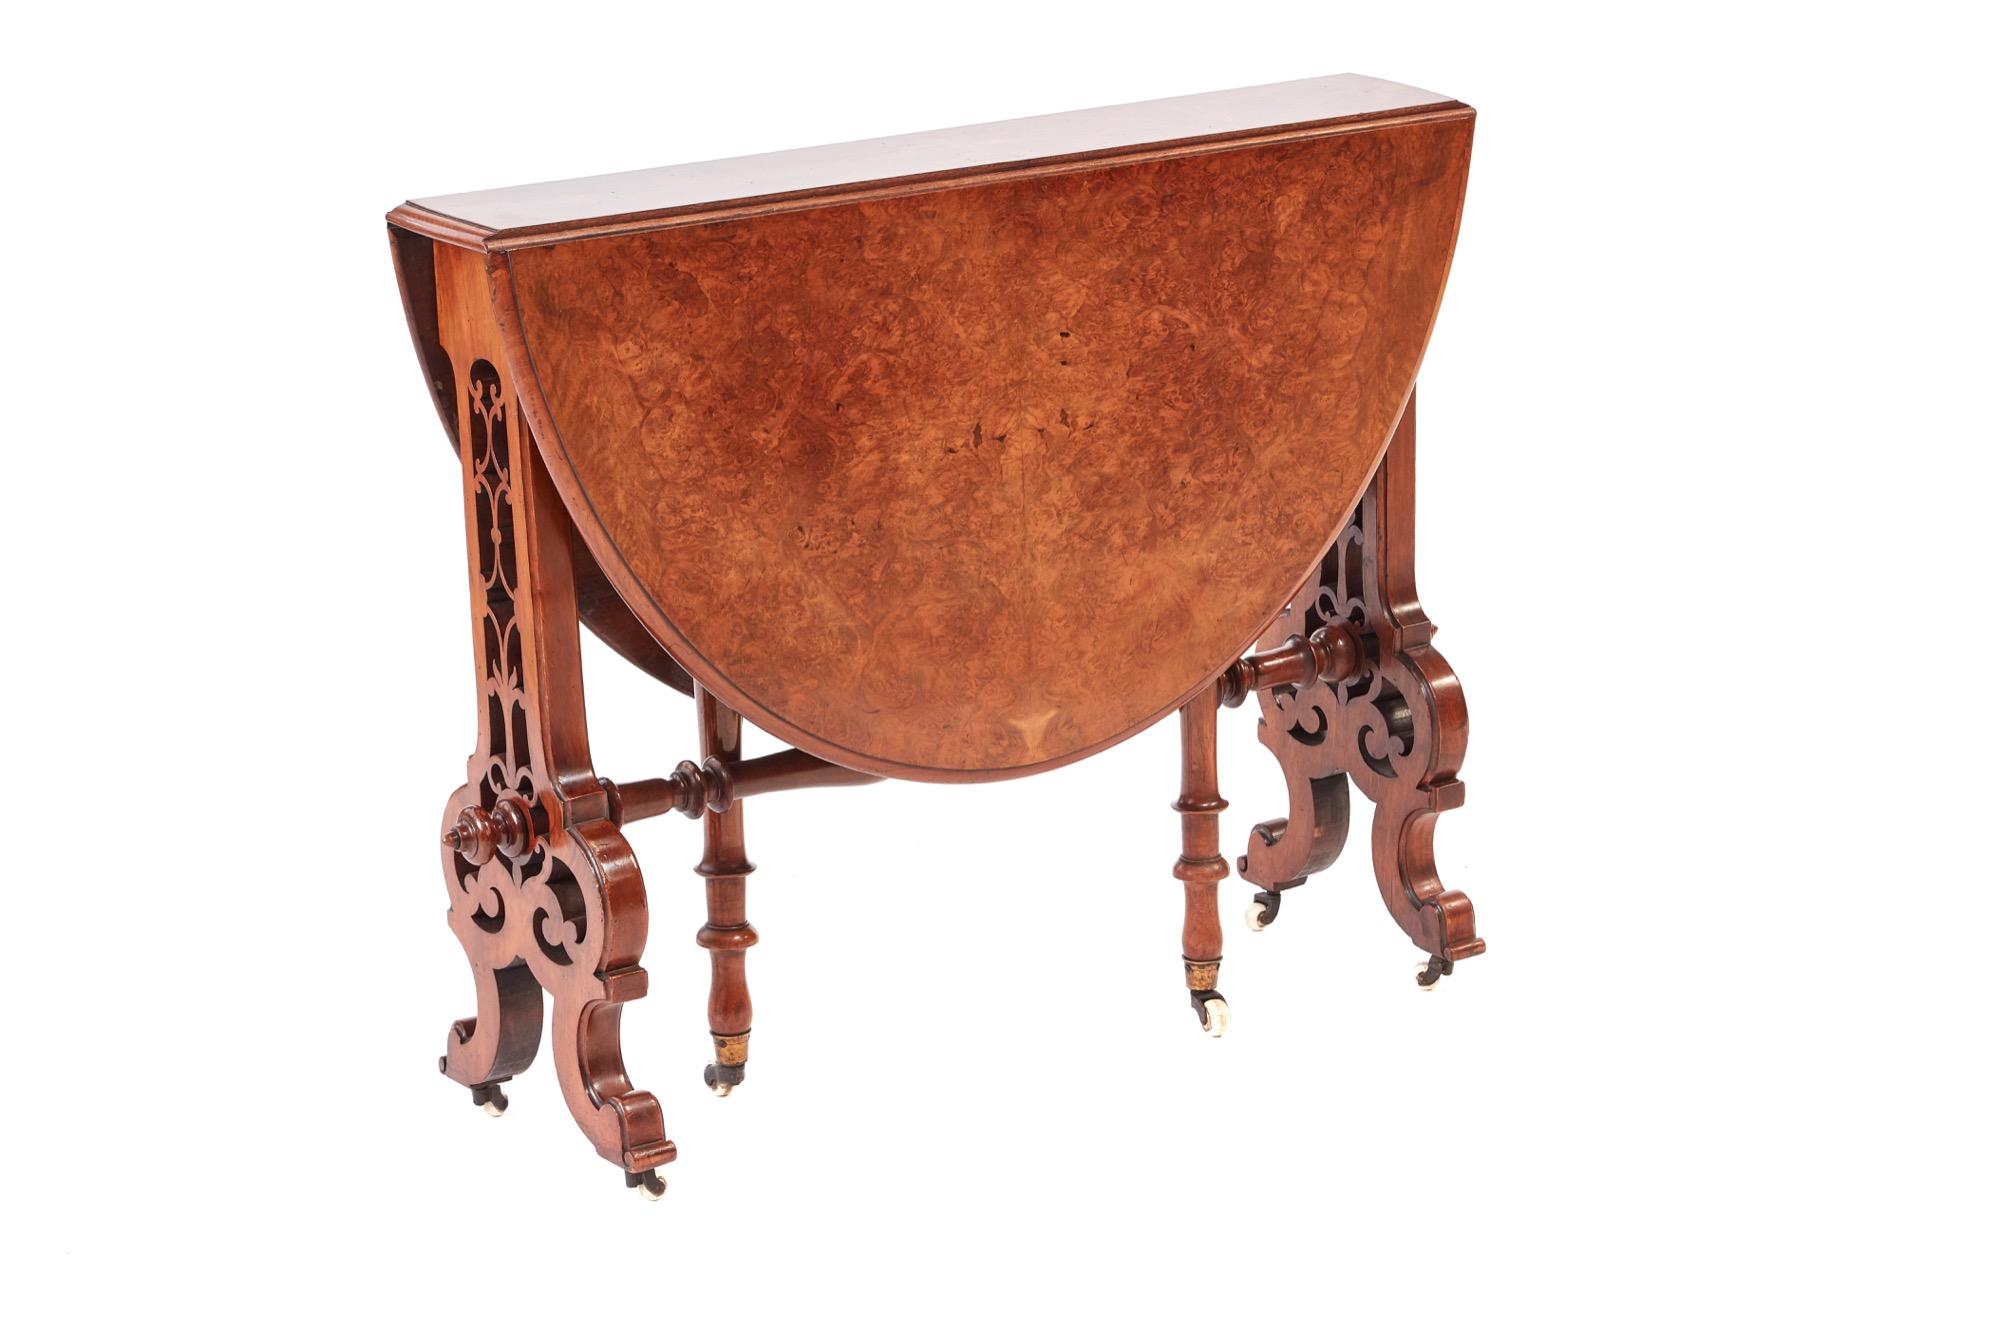 Fine quality Victorian antique burr walnut Sutherland table which has a fantastic burr walnut top with two drop leaves and a swing out turned gate leg. This attractive piece is supported by fantastic carved ends raised by lovely shaped carved